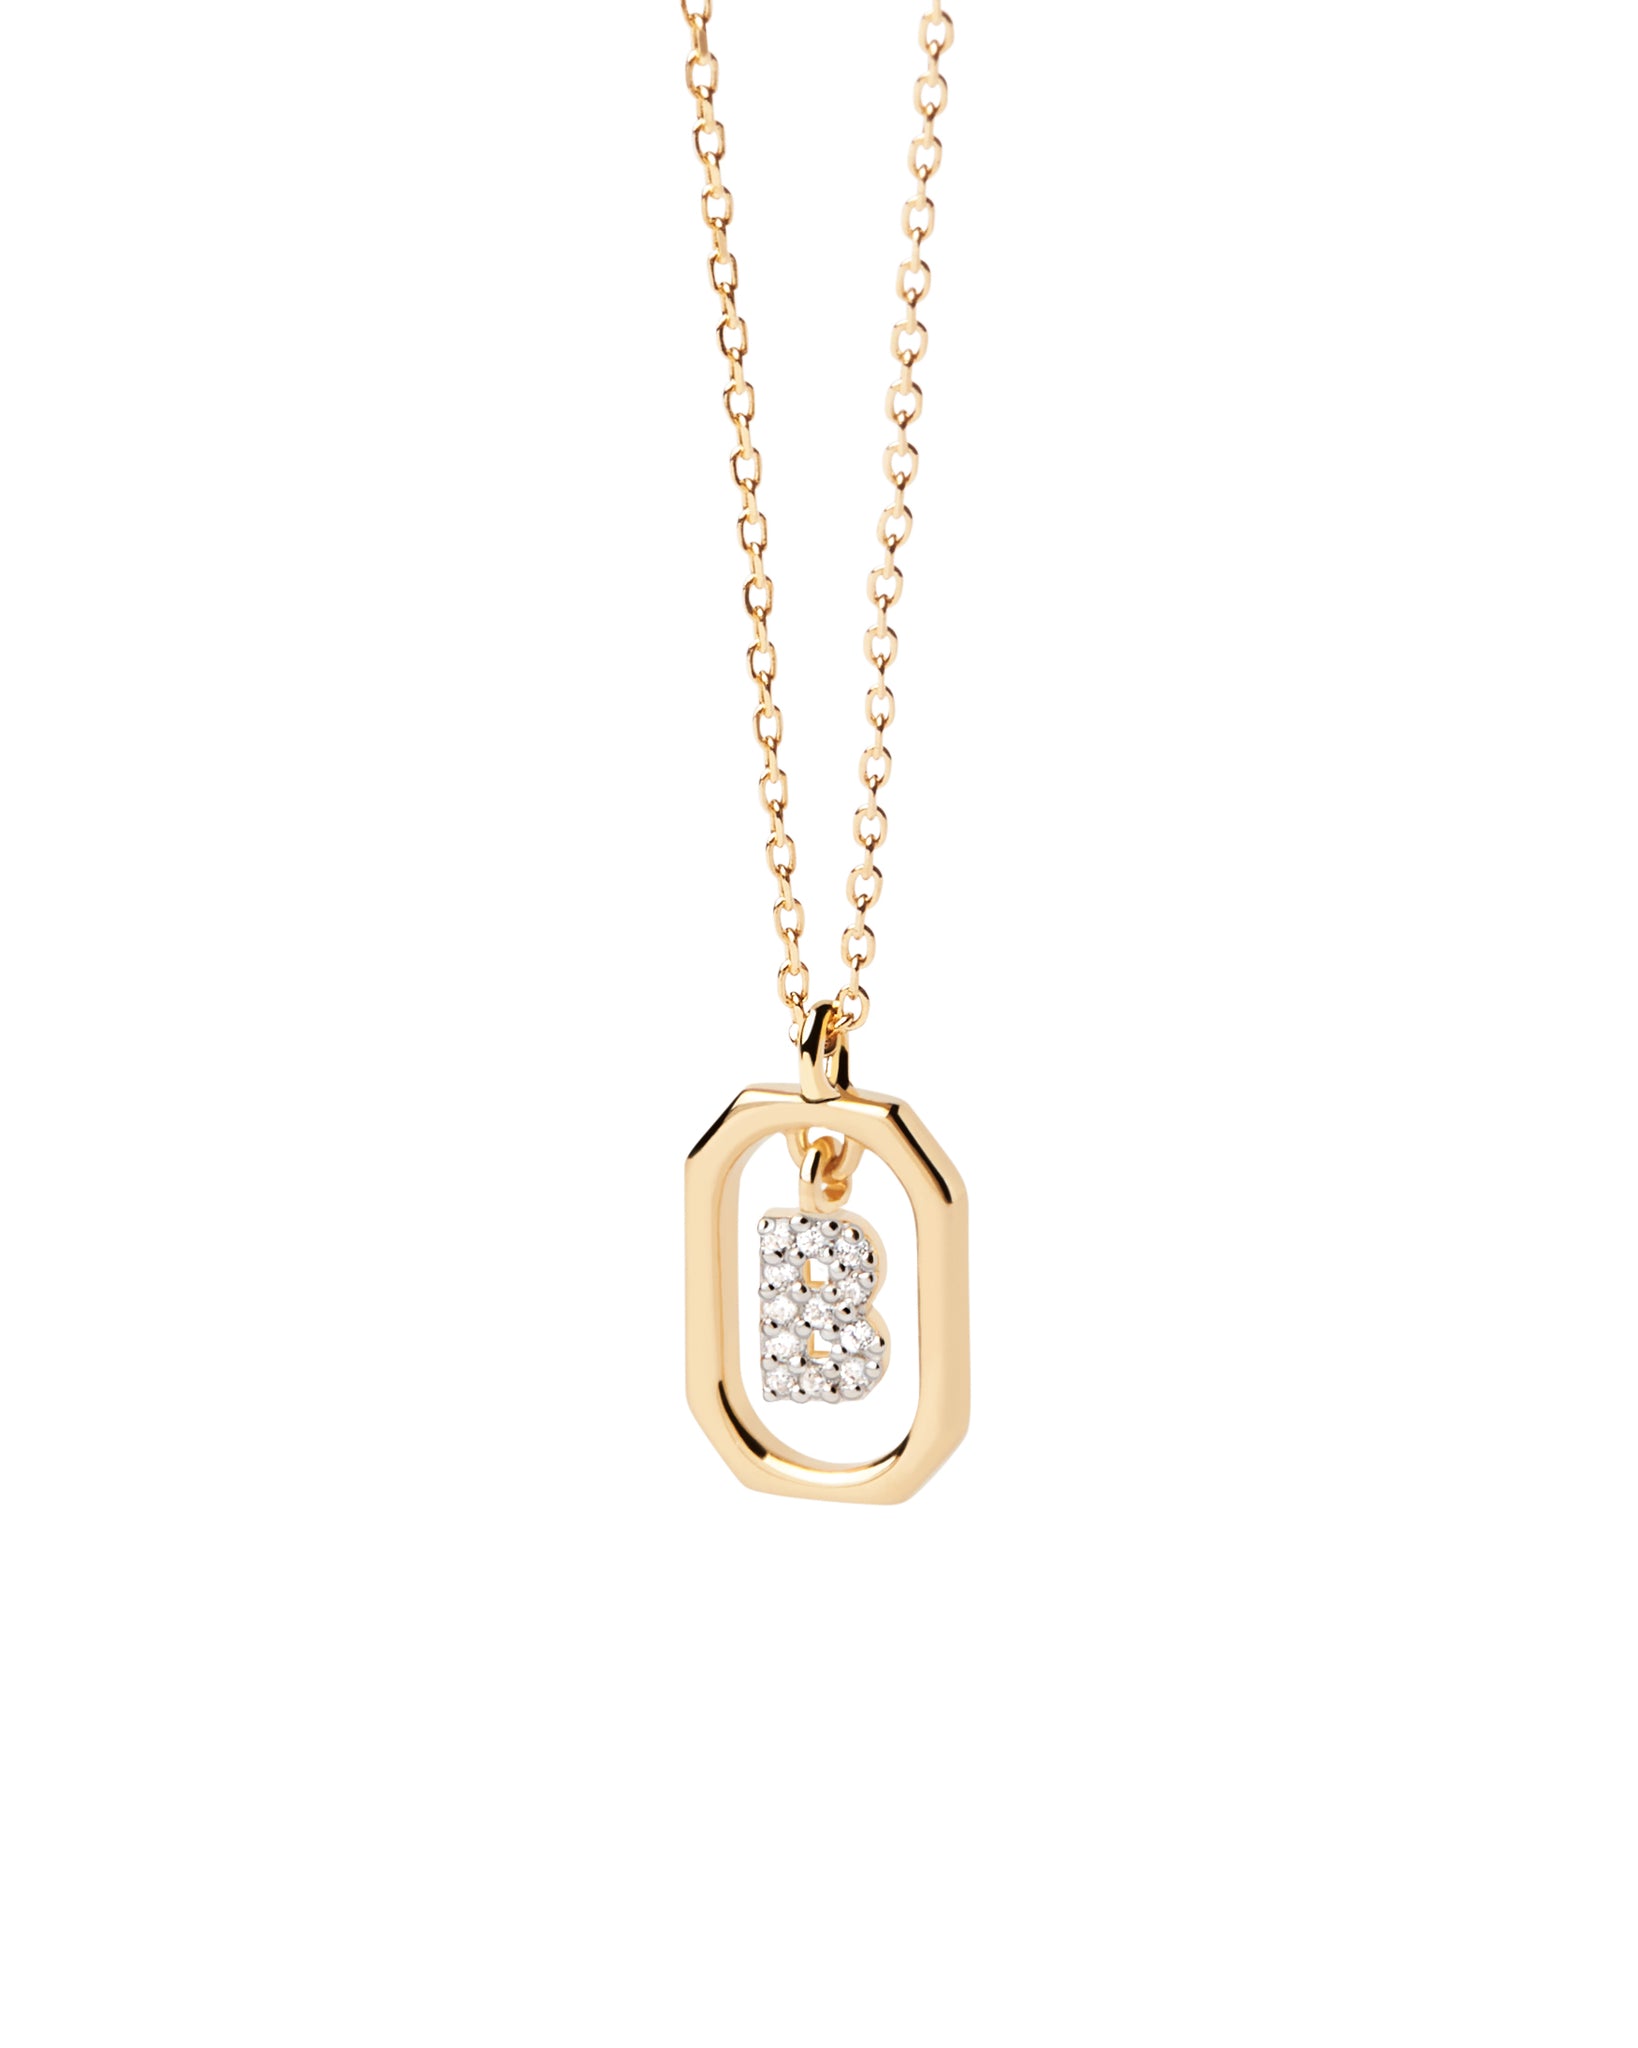 PDPAOLA Mini Letter B Necklace - 925 Sterling Silver / 18K Gold Plating